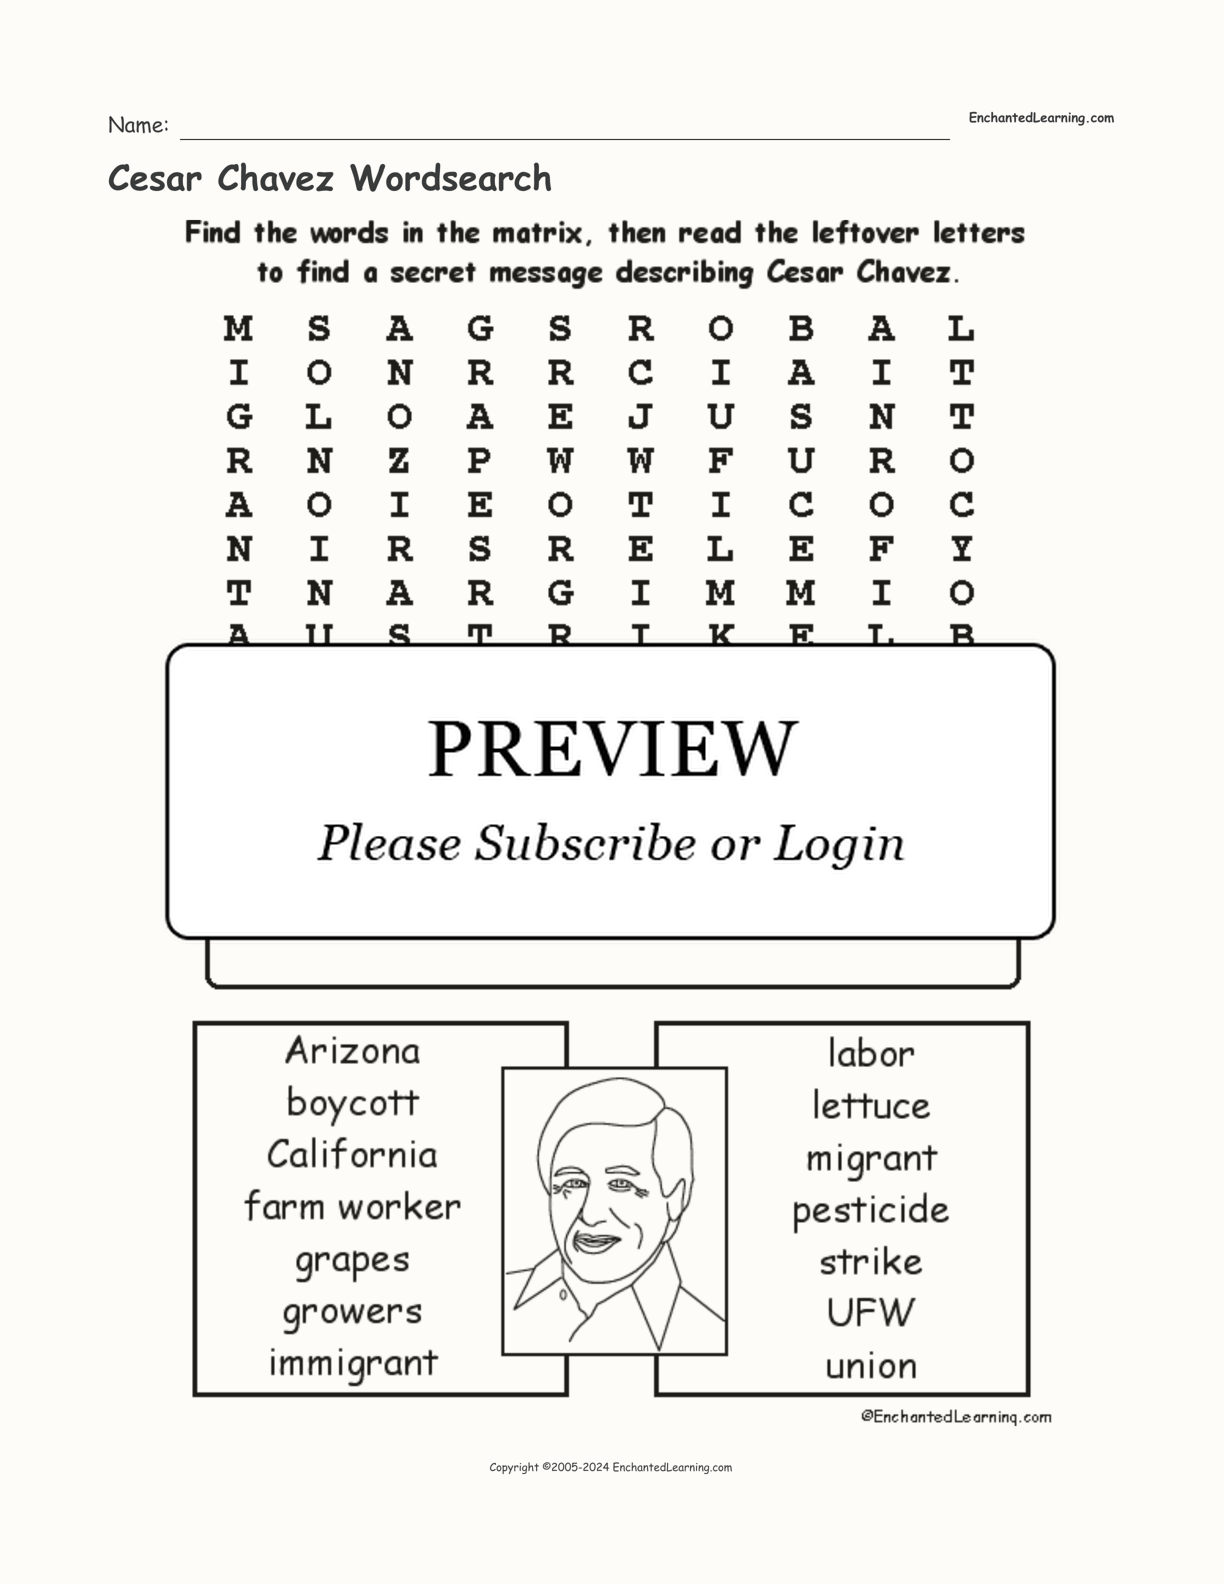 Cesar Chavez Wordsearch interactive worksheet page 1